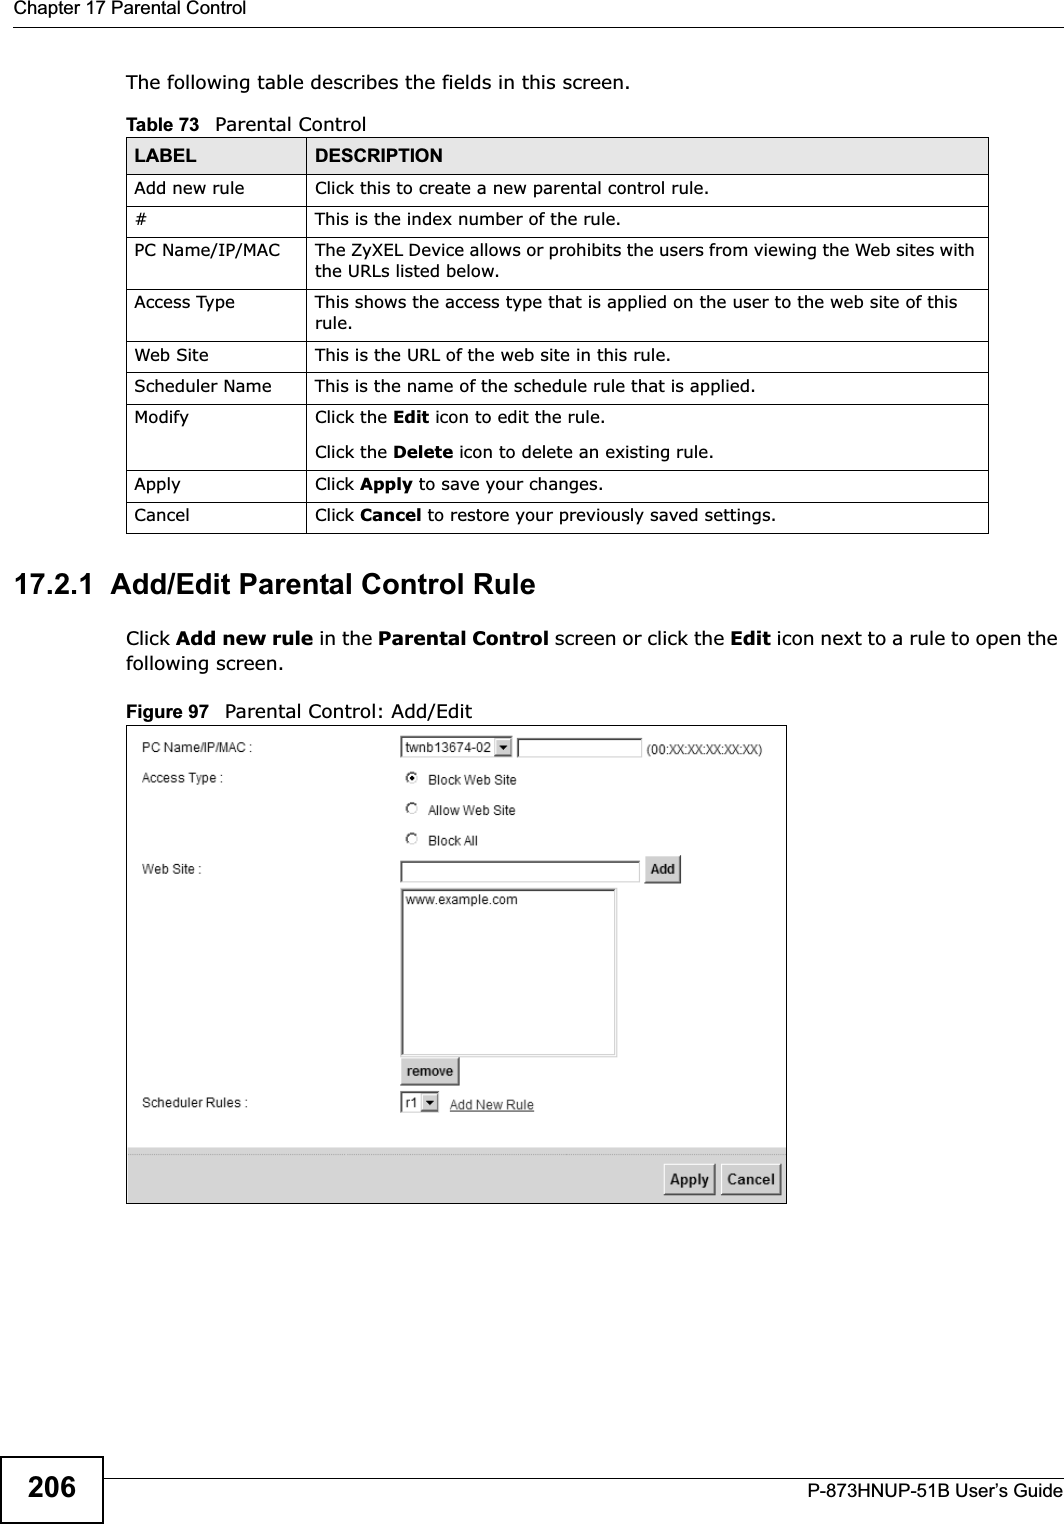 Chapter 17 Parental ControlP-873HNUP-51B User’s Guide206The following table describes the fields in this screen. 17.2.1  Add/Edit Parental Control RuleClick Add new rule in the Parental Control screen or click the Edit icon next to a rule to open the following screen. Figure 97   Parental Control: Add/Edit Table 73   Parental ControlLABEL DESCRIPTIONAdd new rule Click this to create a new parental control rule.# This is the index number of the rule.PC Name/IP/MAC The ZyXEL Device allows or prohibits the users from viewing the Web sites with the URLs listed below.Access Type This shows the access type that is applied on the user to the web site of this rule.Web Site This is the URL of the web site in this rule.Scheduler Name This is the name of the schedule rule that is applied.Modify Click the Edit icon to edit the rule.Click the Delete icon to delete an existing rule.Apply Click Apply to save your changes.Cancel Click Cancel to restore your previously saved settings.